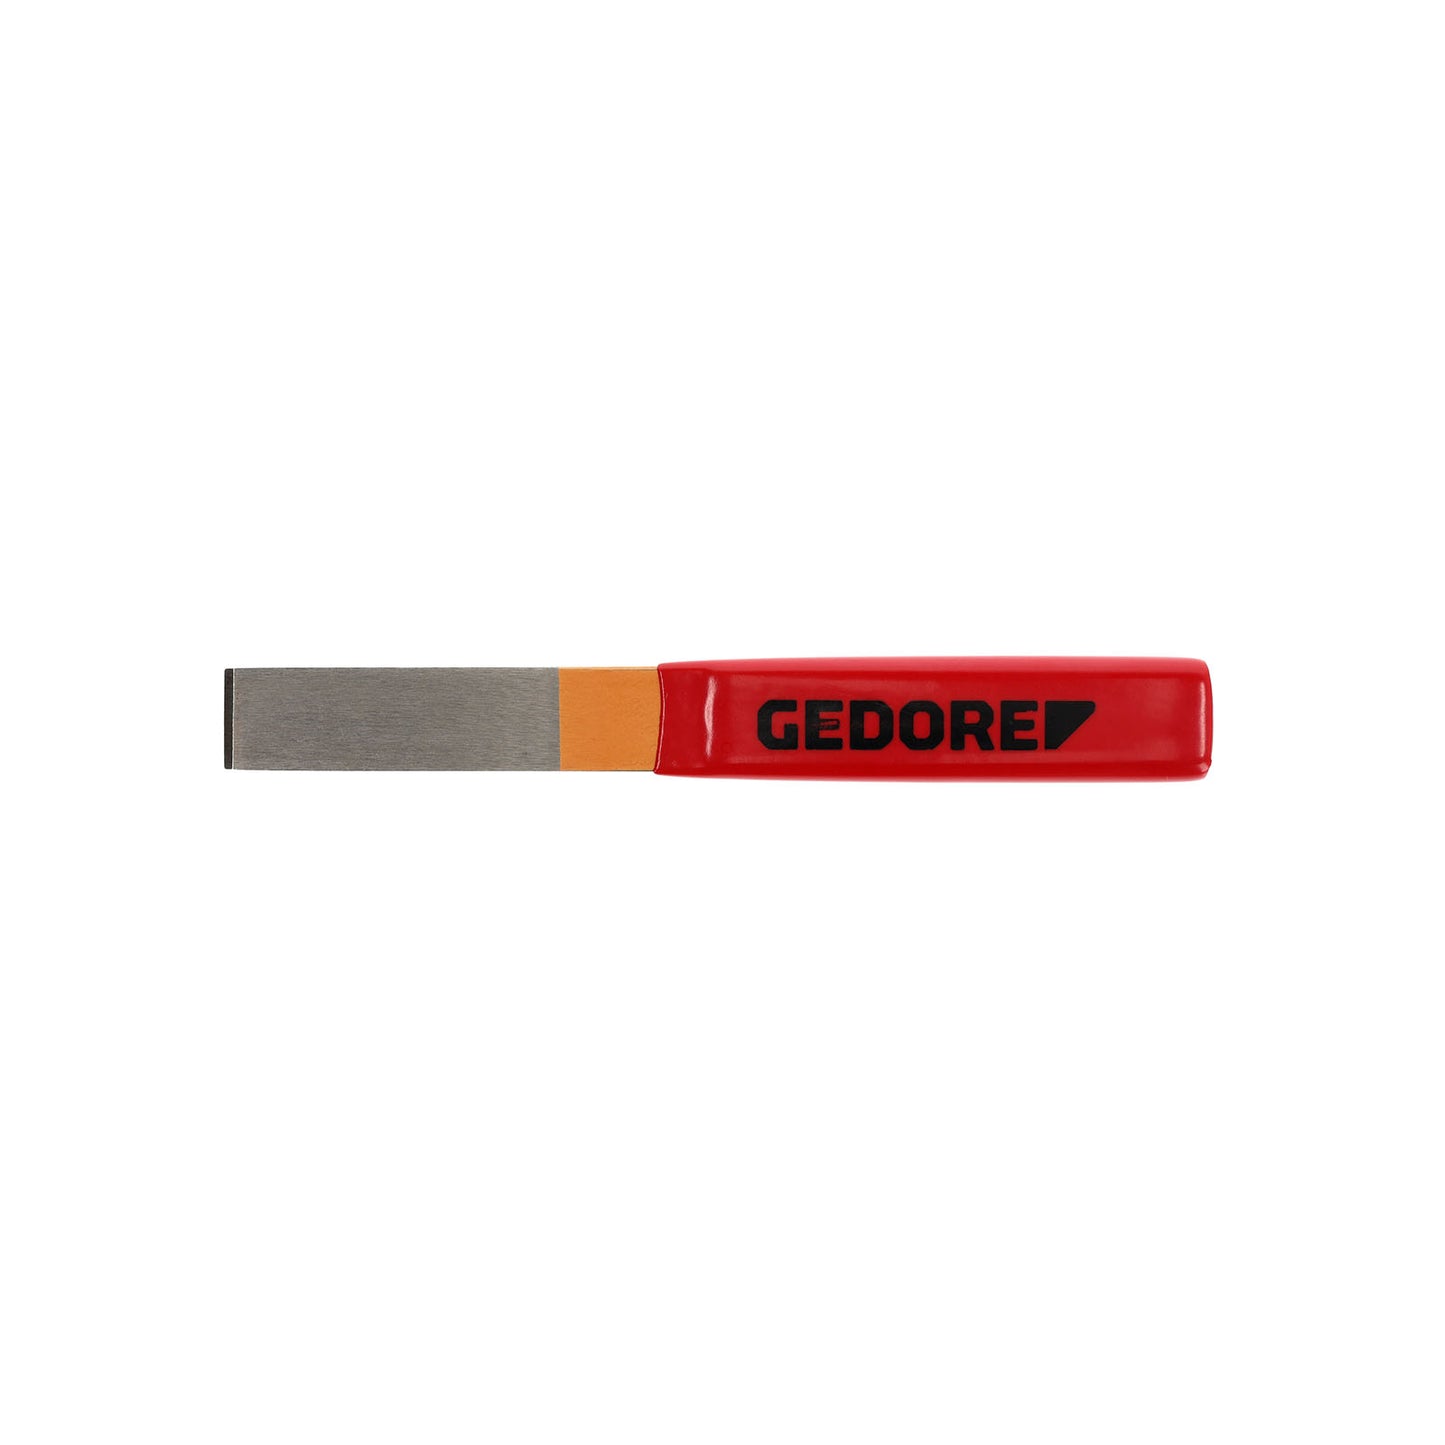 GEDORE 104 P - Burin P/Carrossier (8724230)